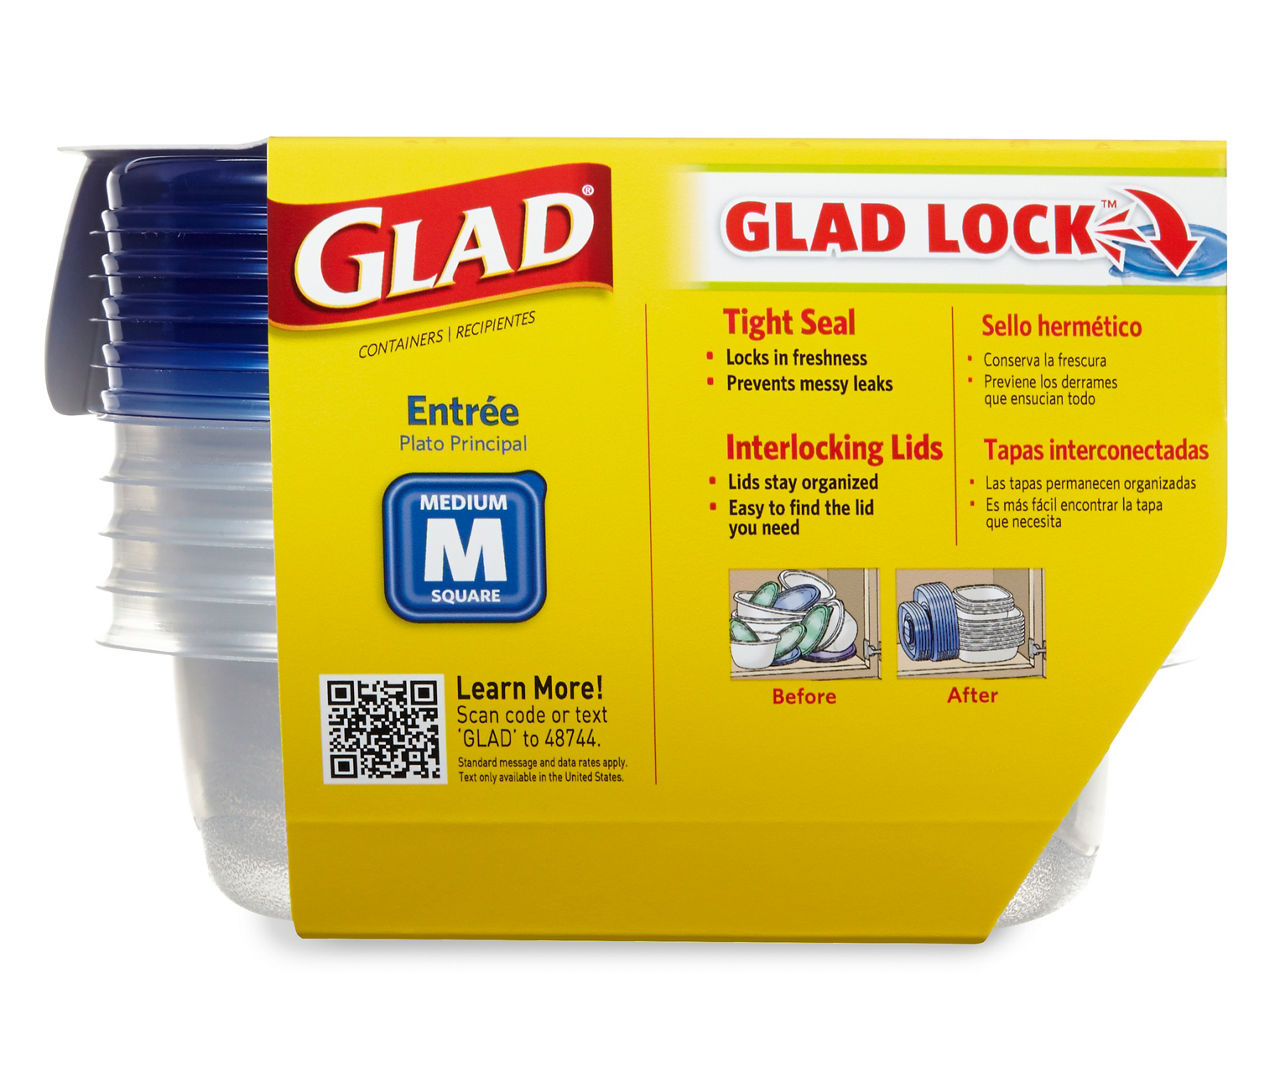 Glad Entree Food Storage Containers with Lids, 25 oz - 5 pack